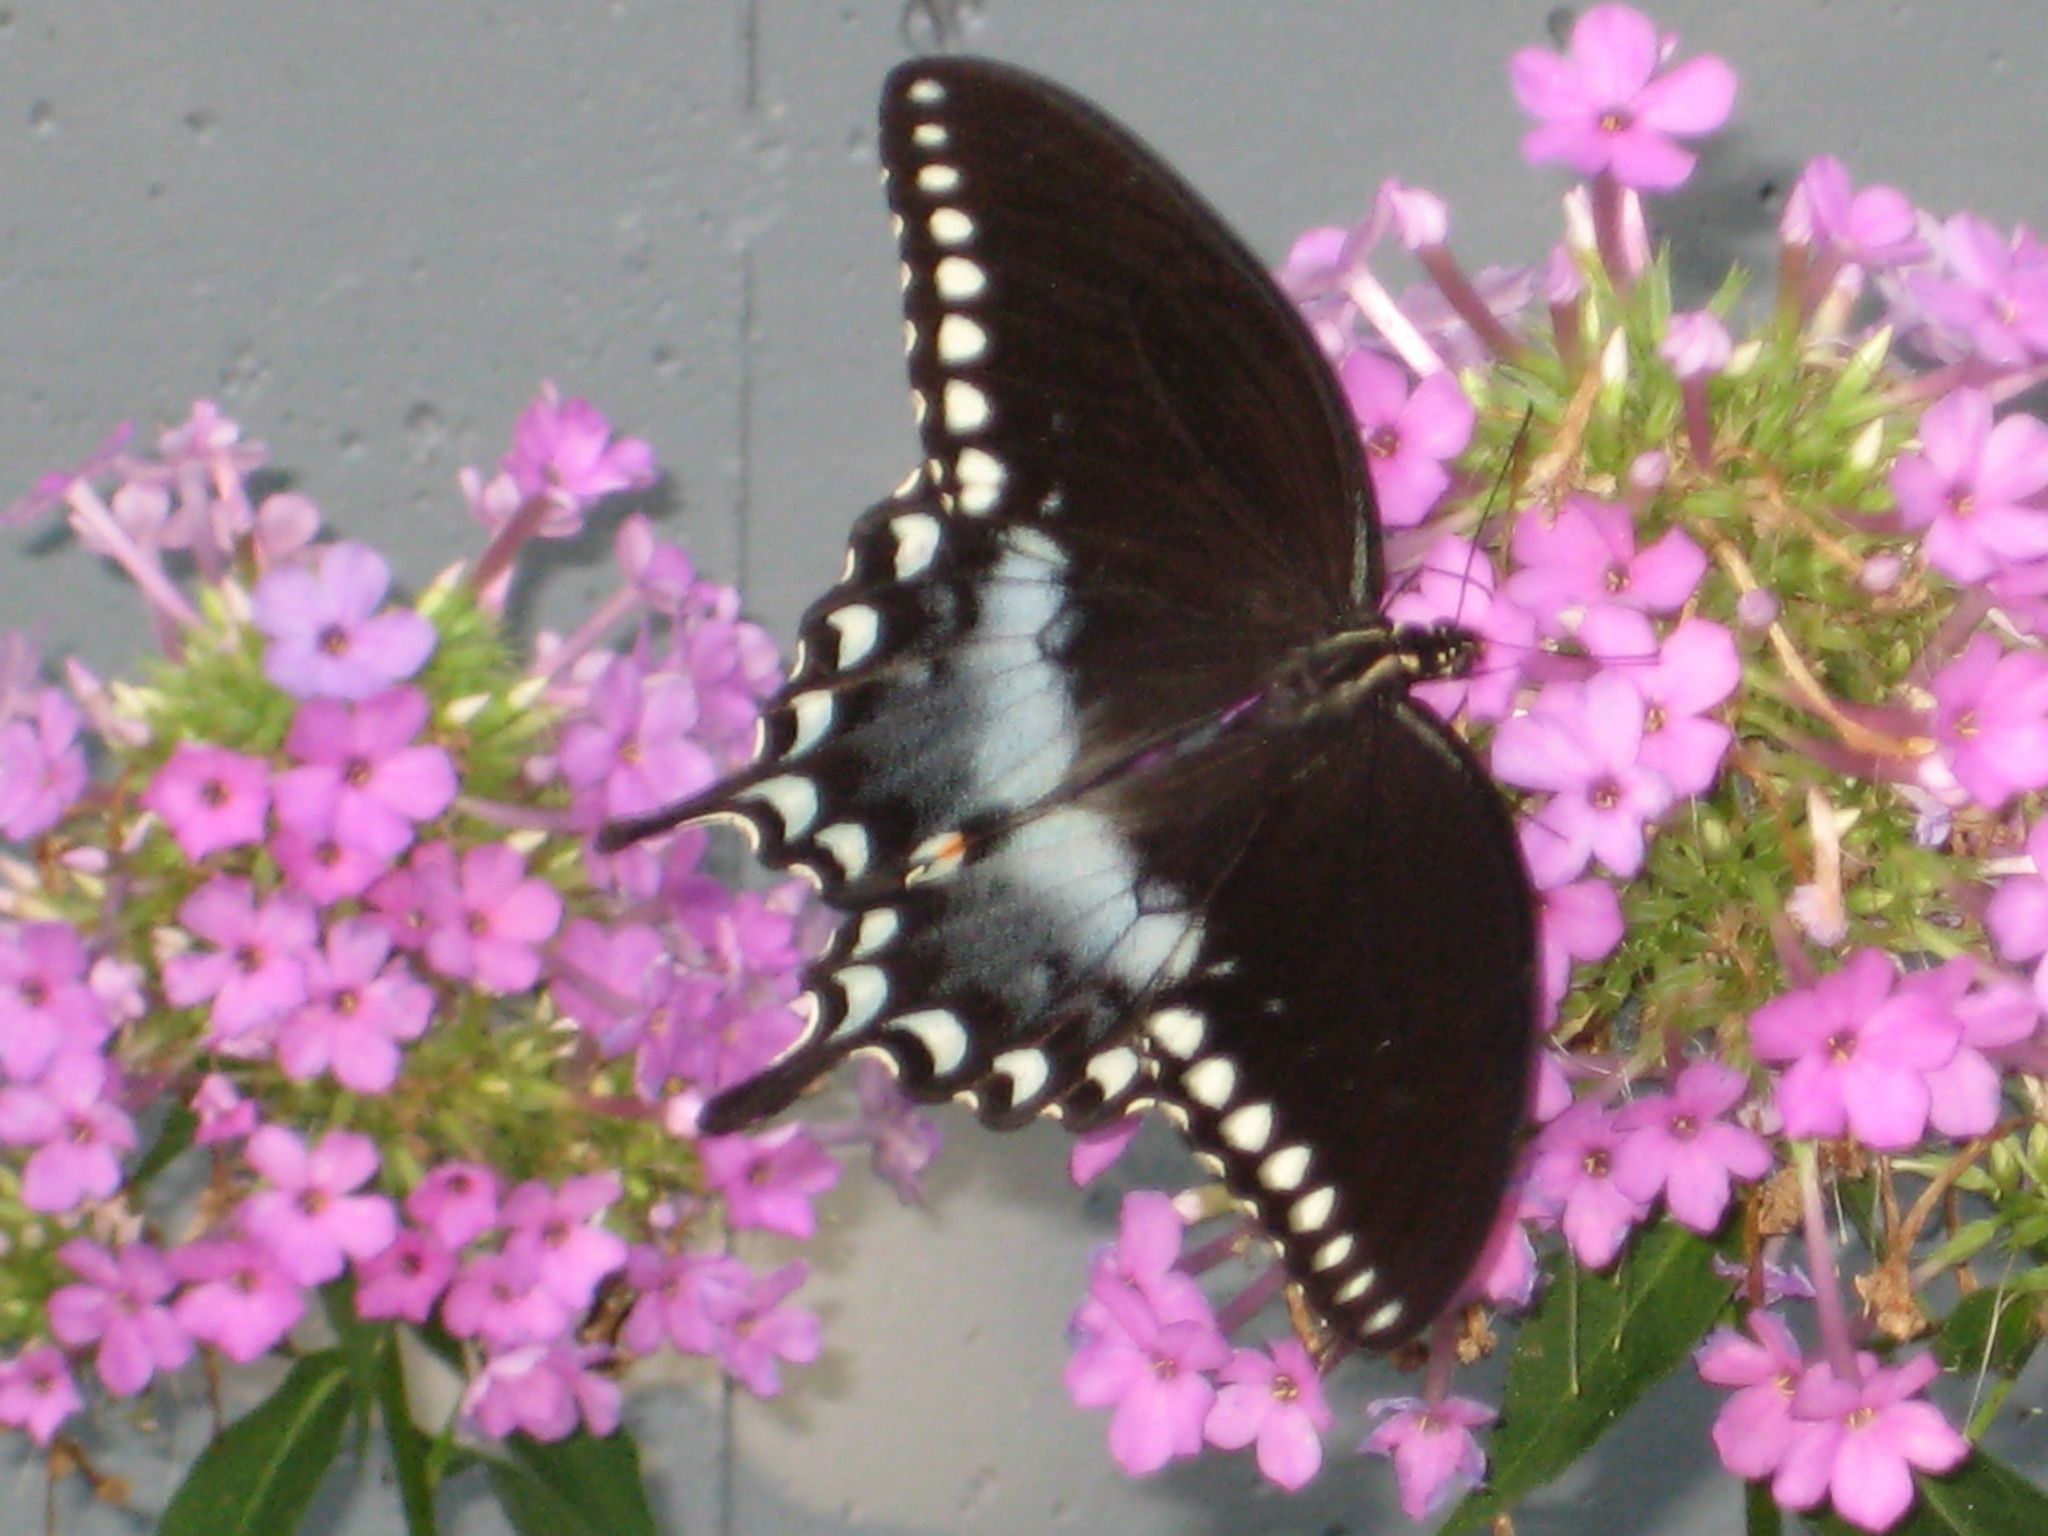 Spicebush and black swallowtail butterflies look alike, but not